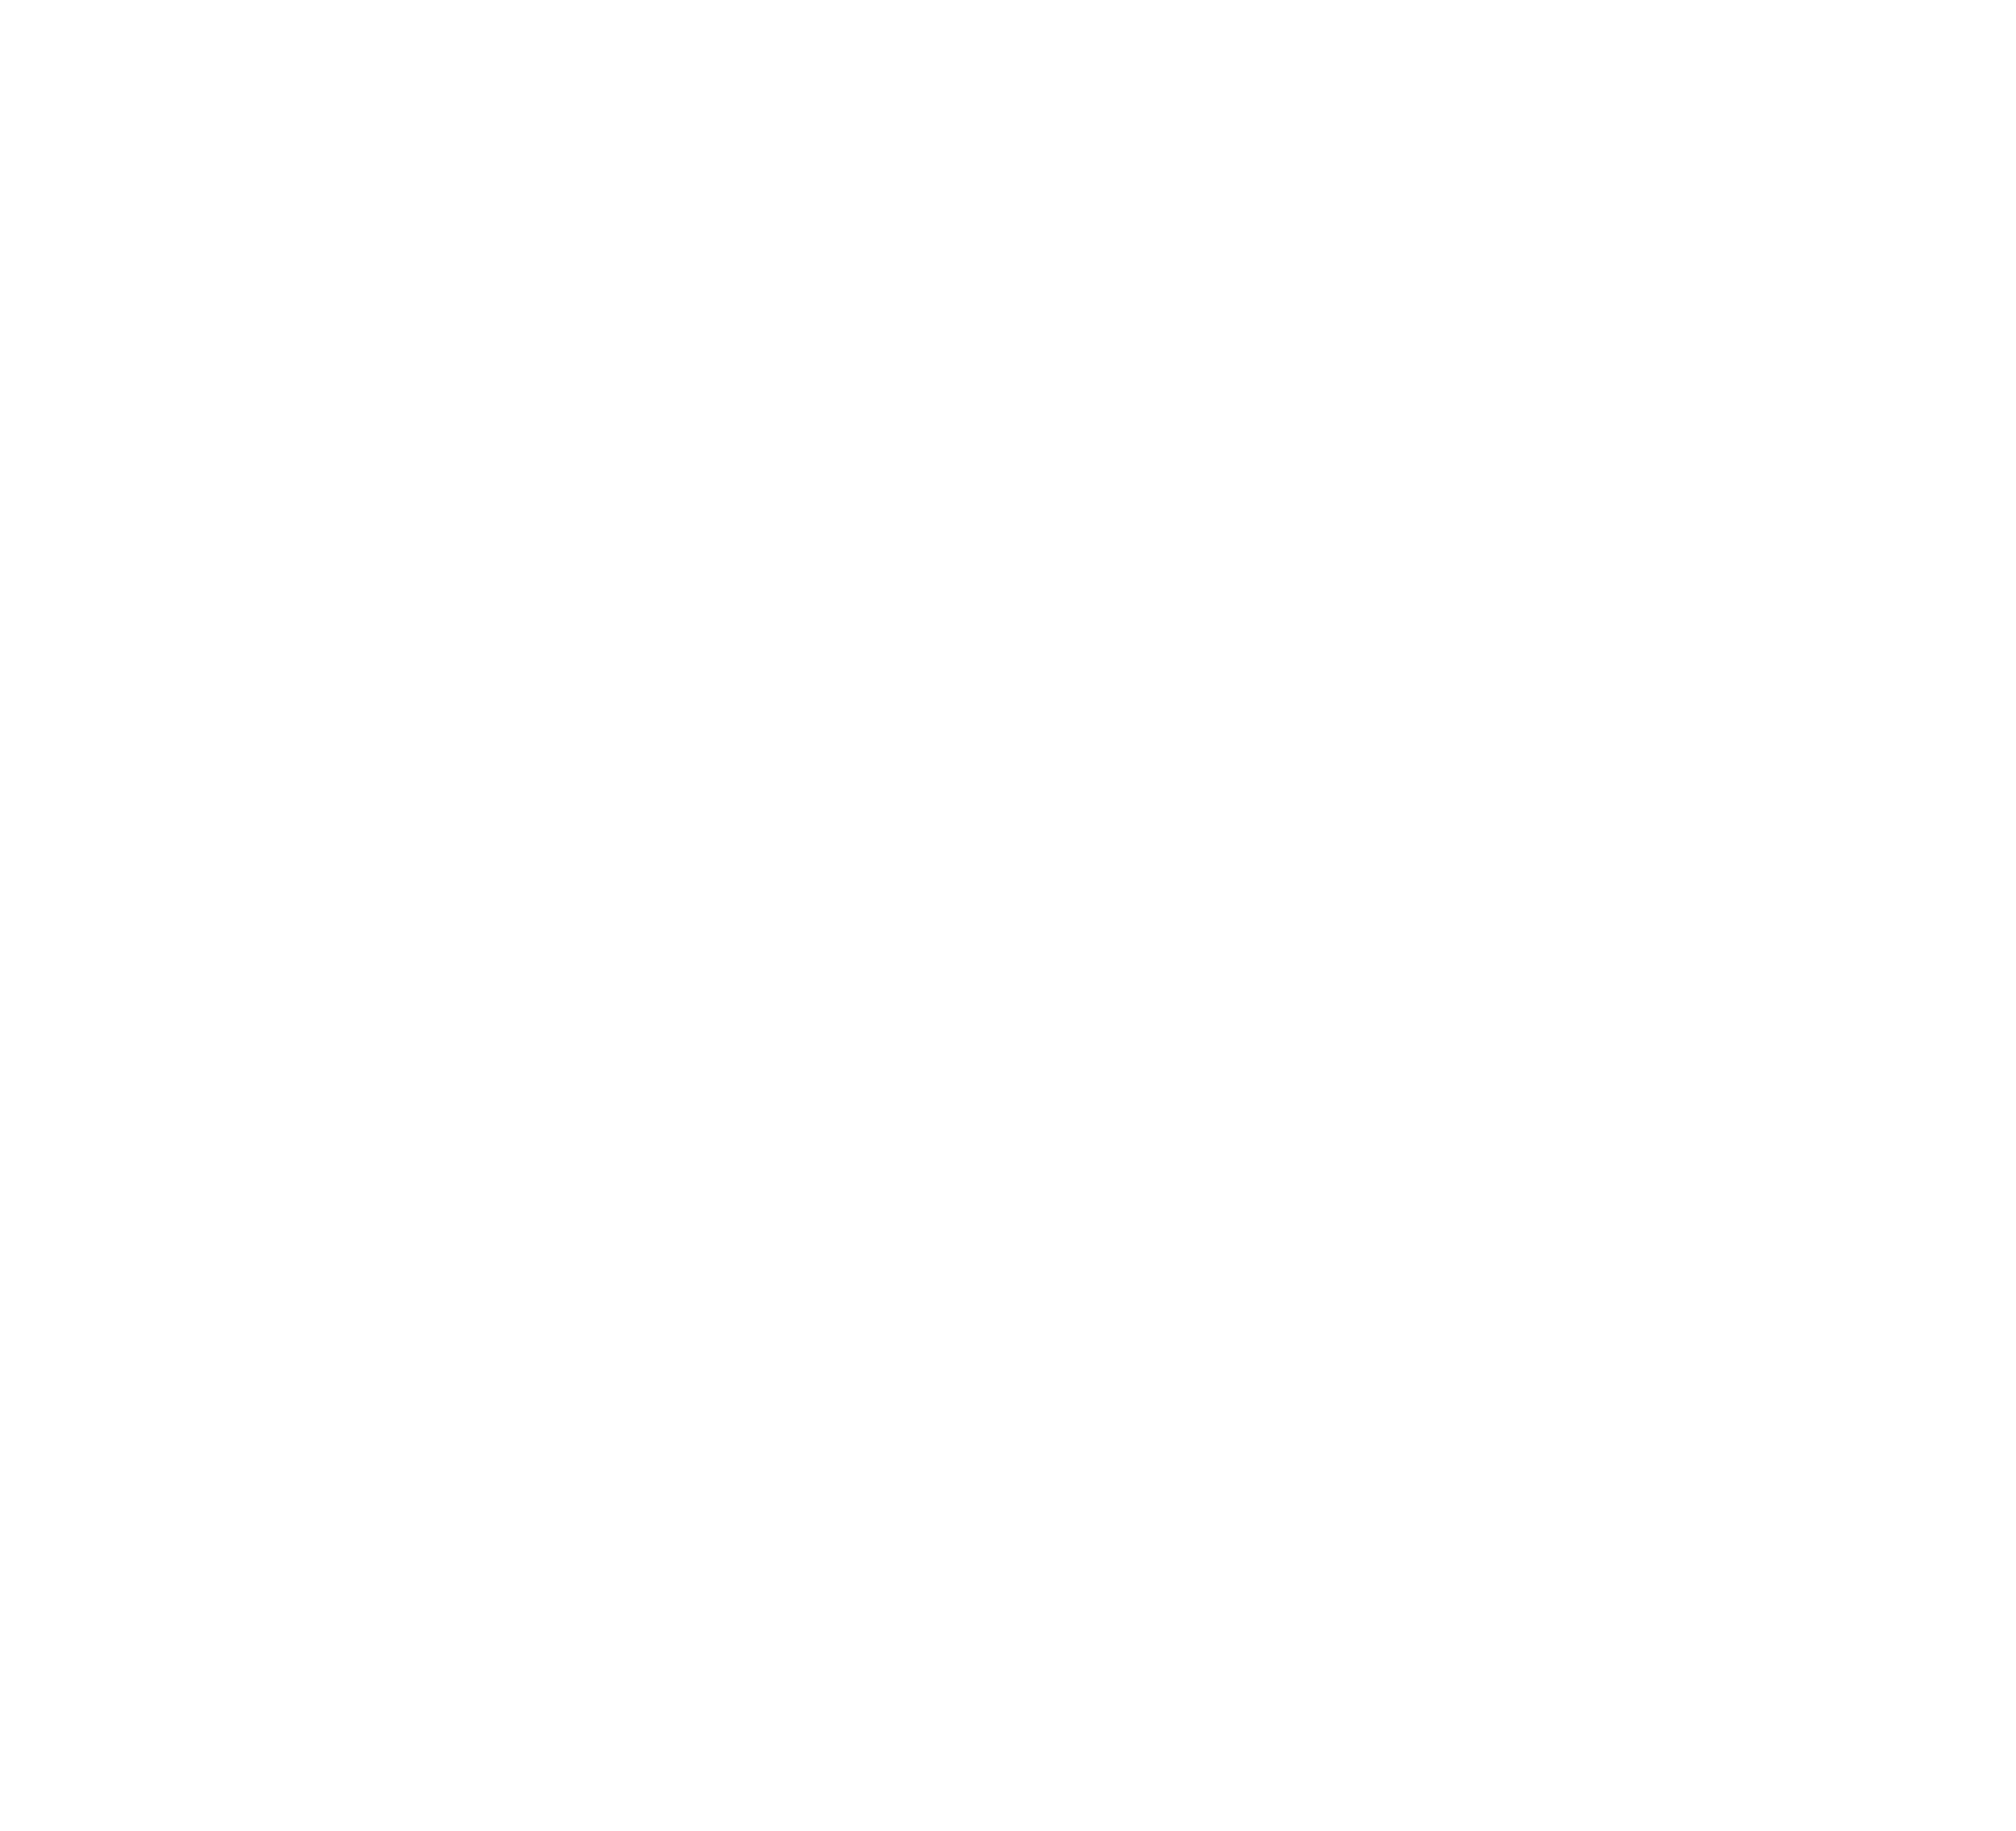  Utilise sunny and windy days to dry your clothes and save